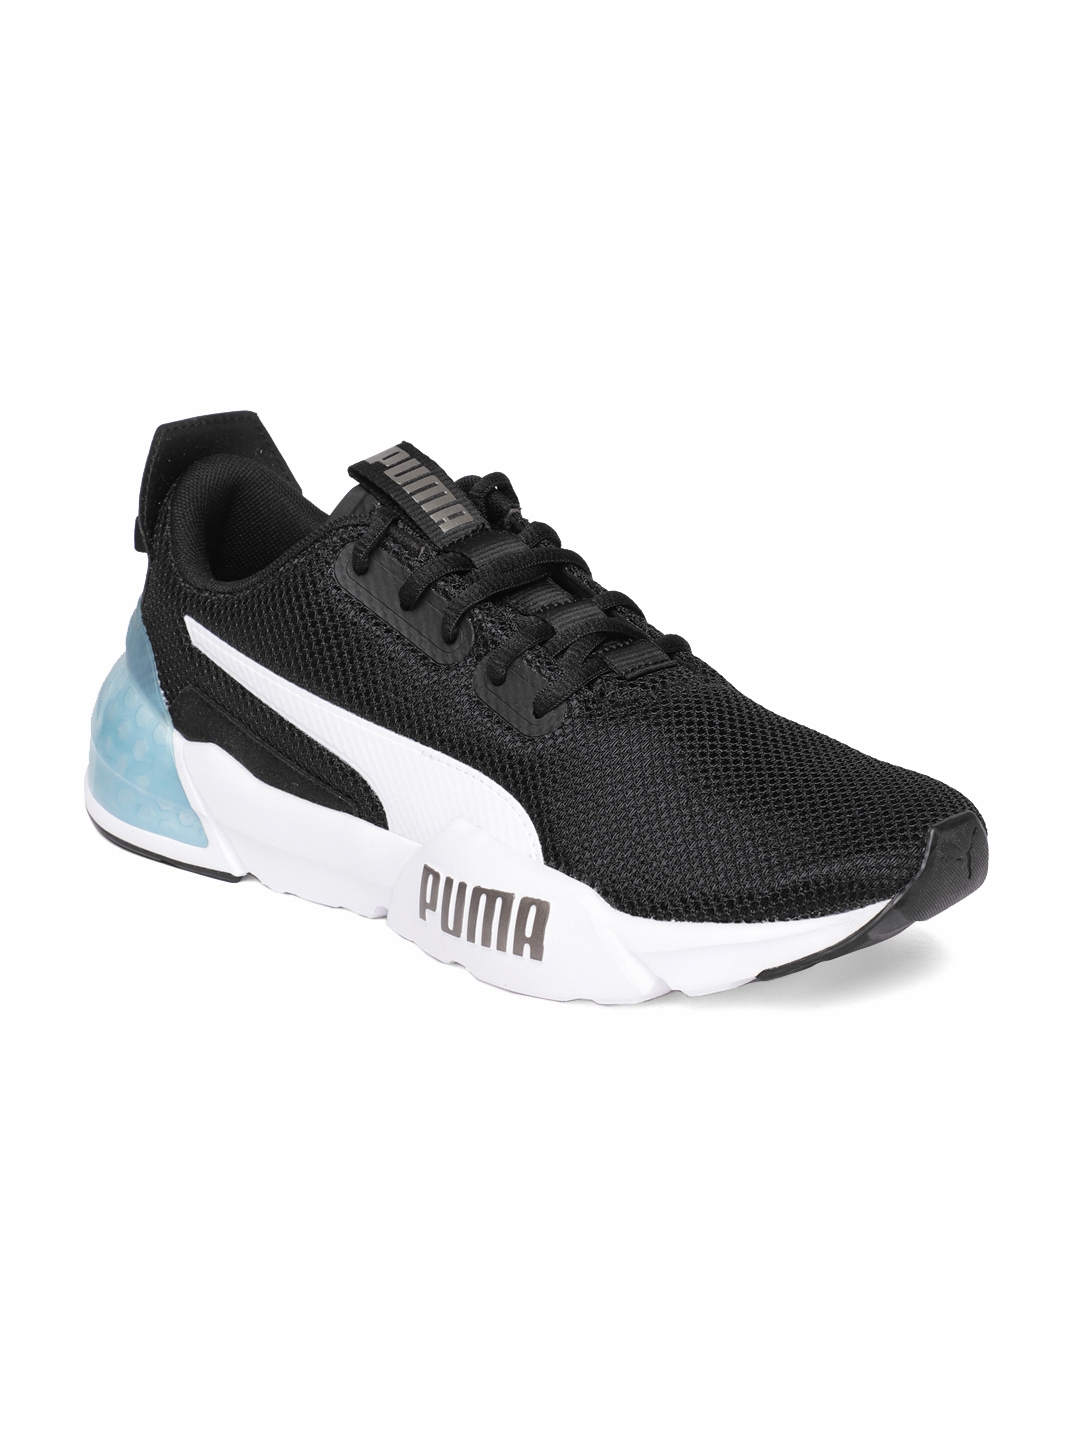 puma cell phase women's training shoes